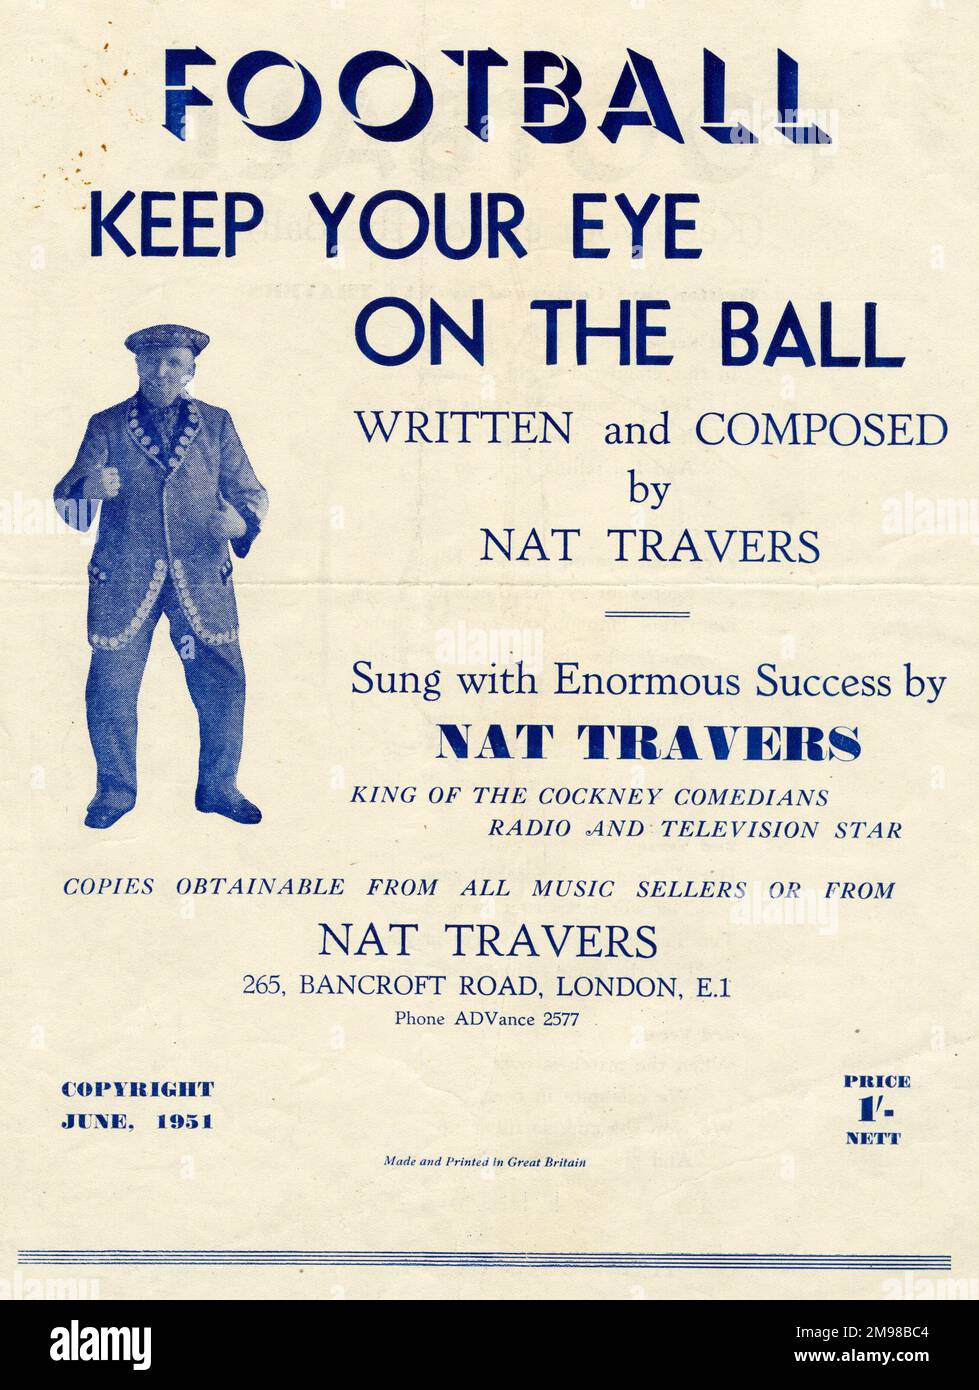 Music cover, Football, Keep Your Eye on the Ball, written, composed and performed by Nat Travers, King of the Cockney Comedians, radio and television star. Stock Photo